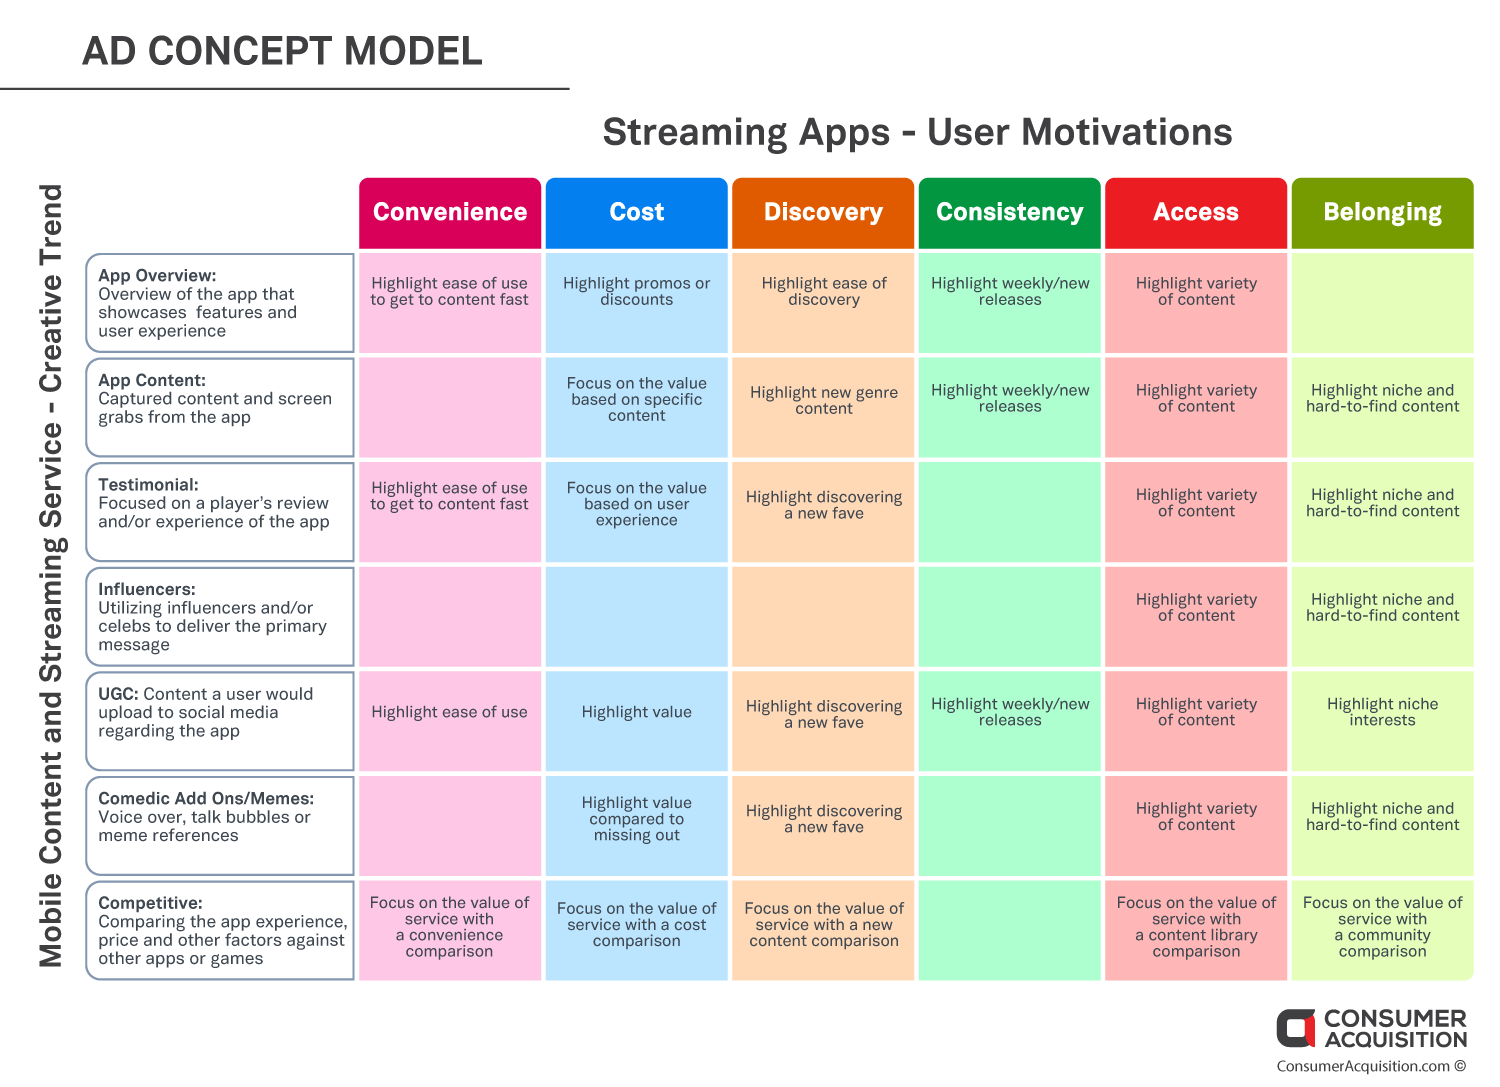 Streaming apps user motivations moblie app ad concepts